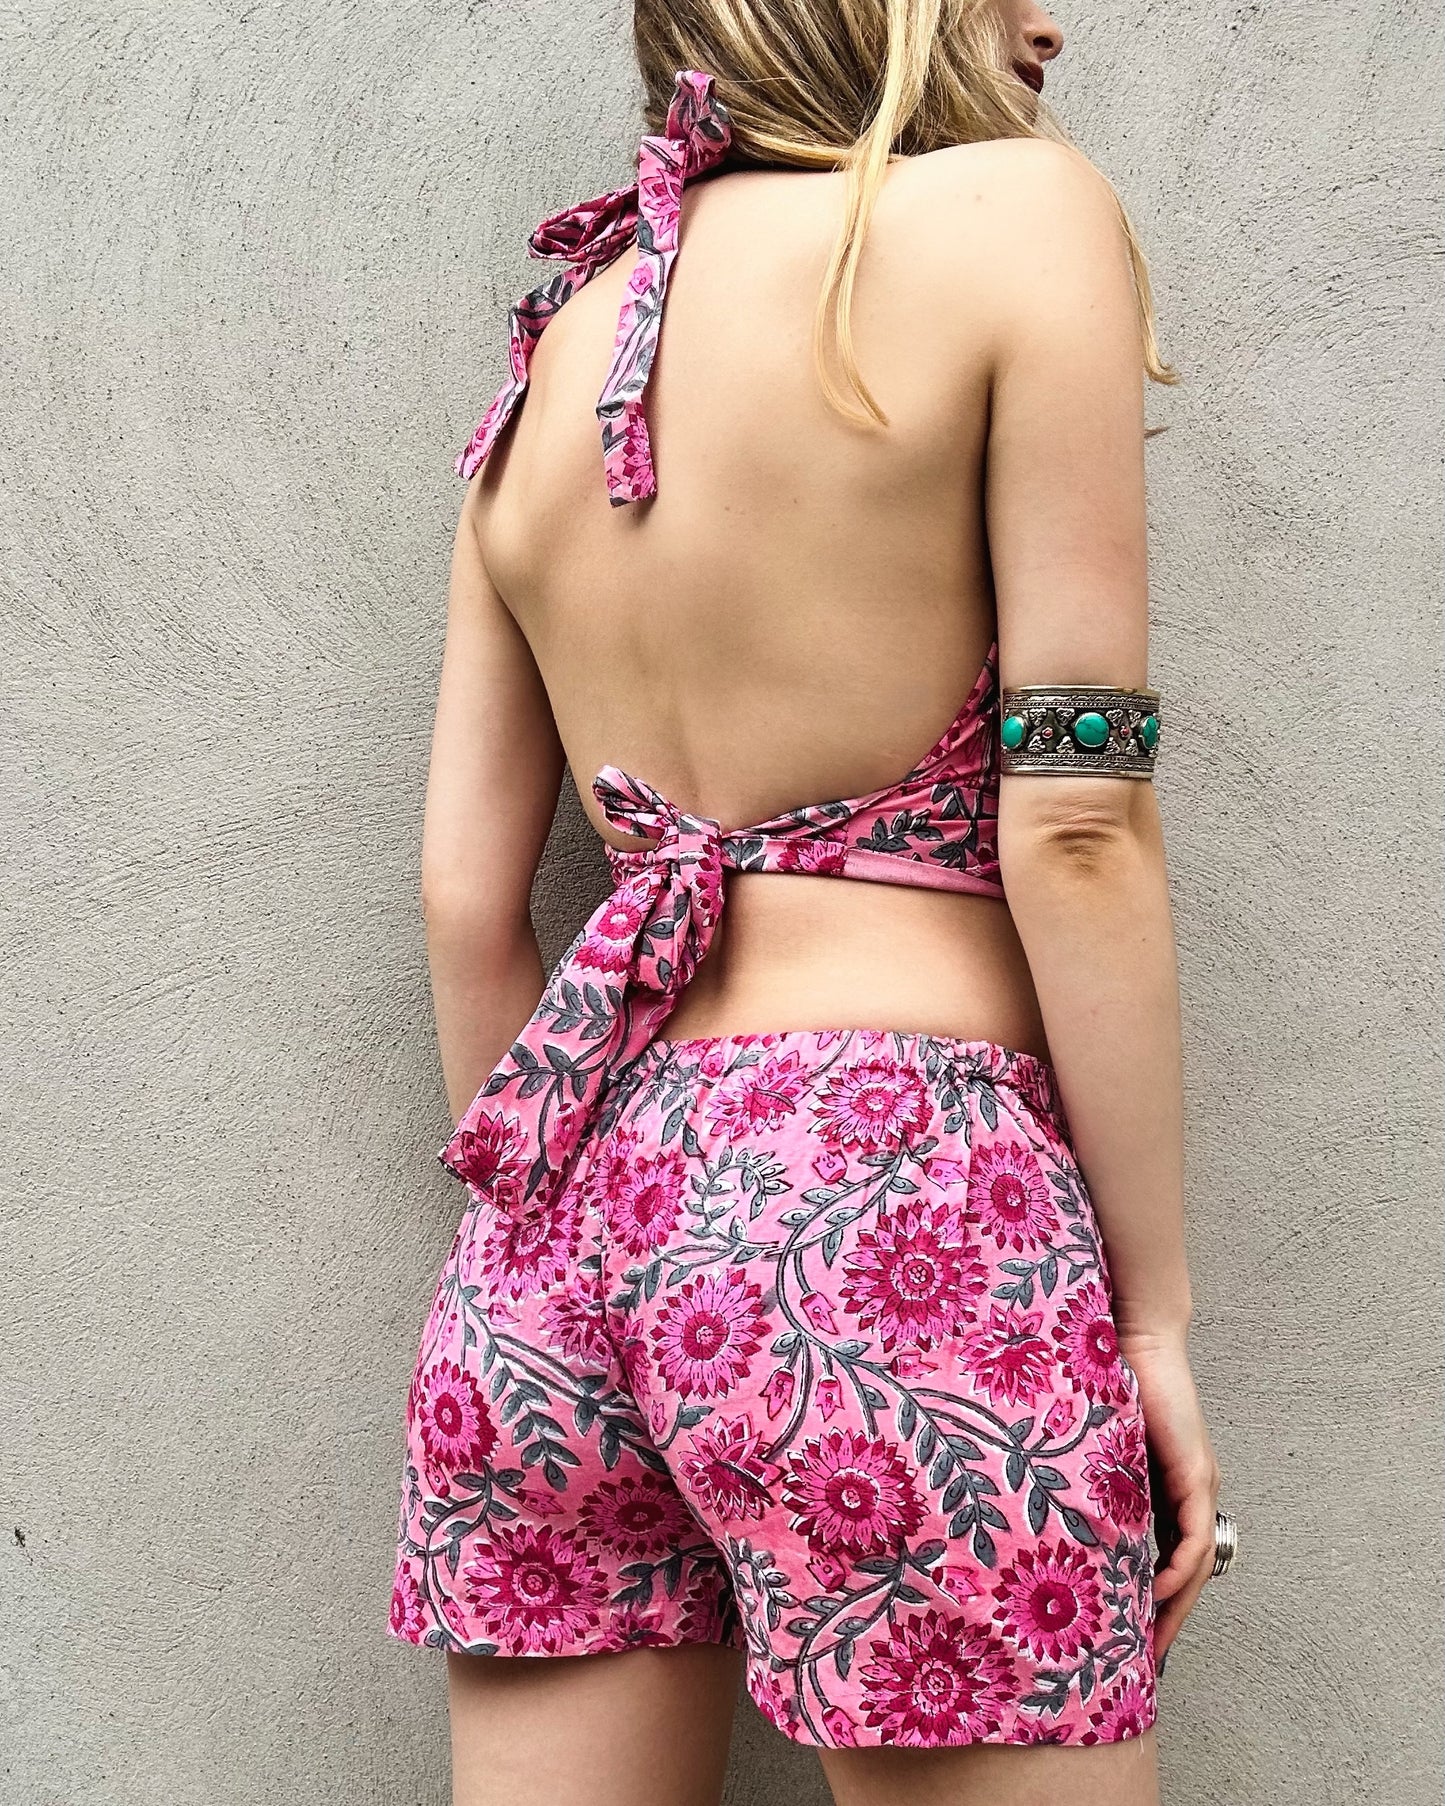 Hibiscus 70s Set - includes Halter Top and Shorts